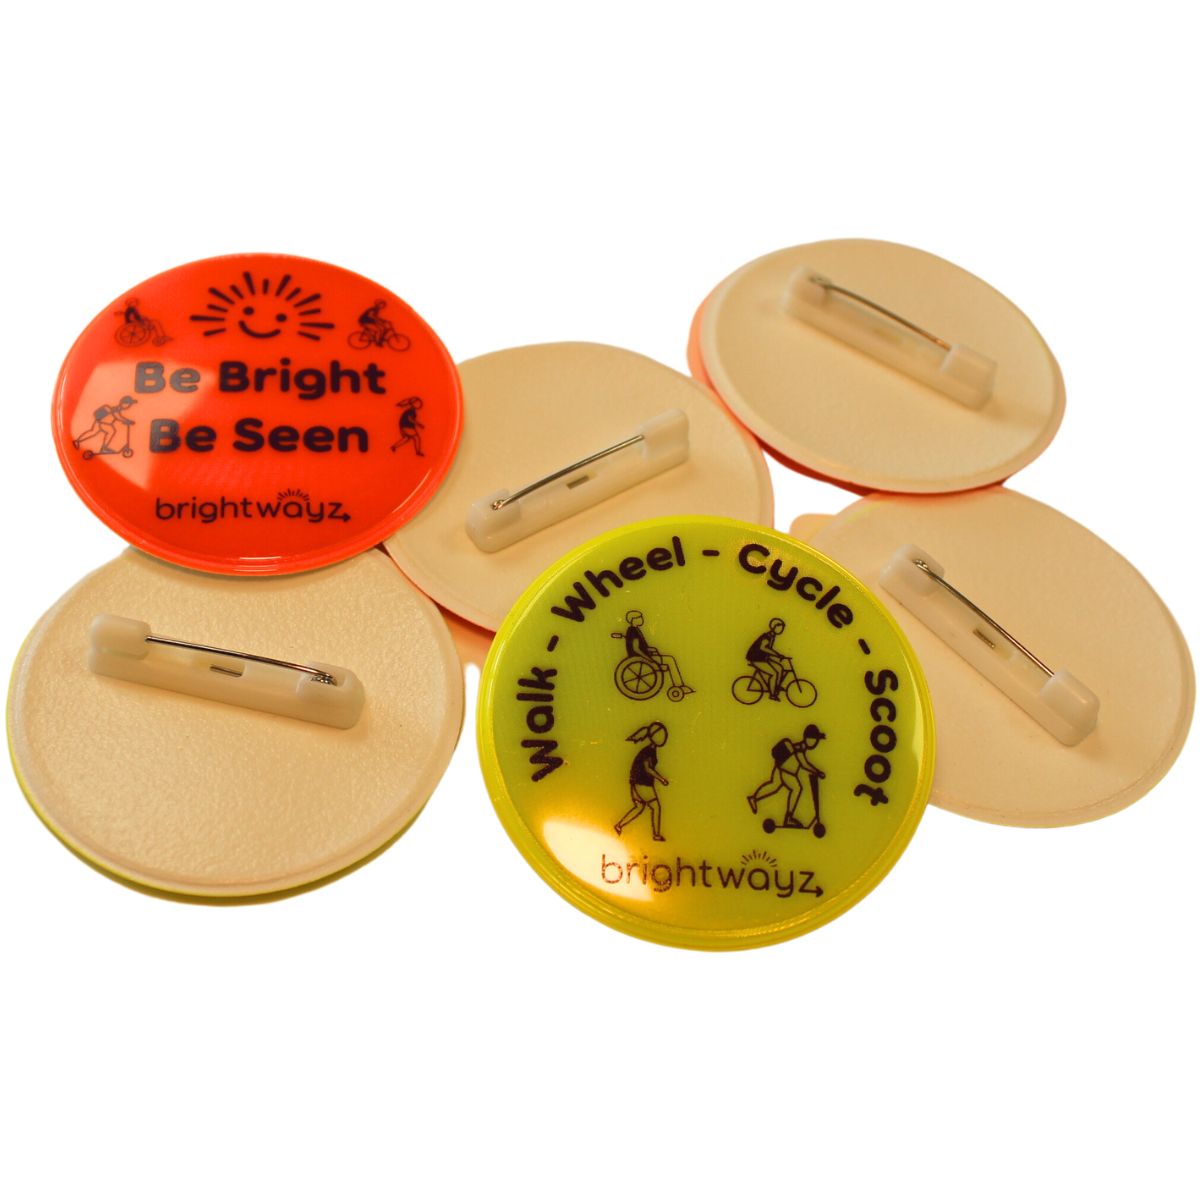 Be Bright Be Seen and Walk Wheel Cycle Scoot Badges showing pins.